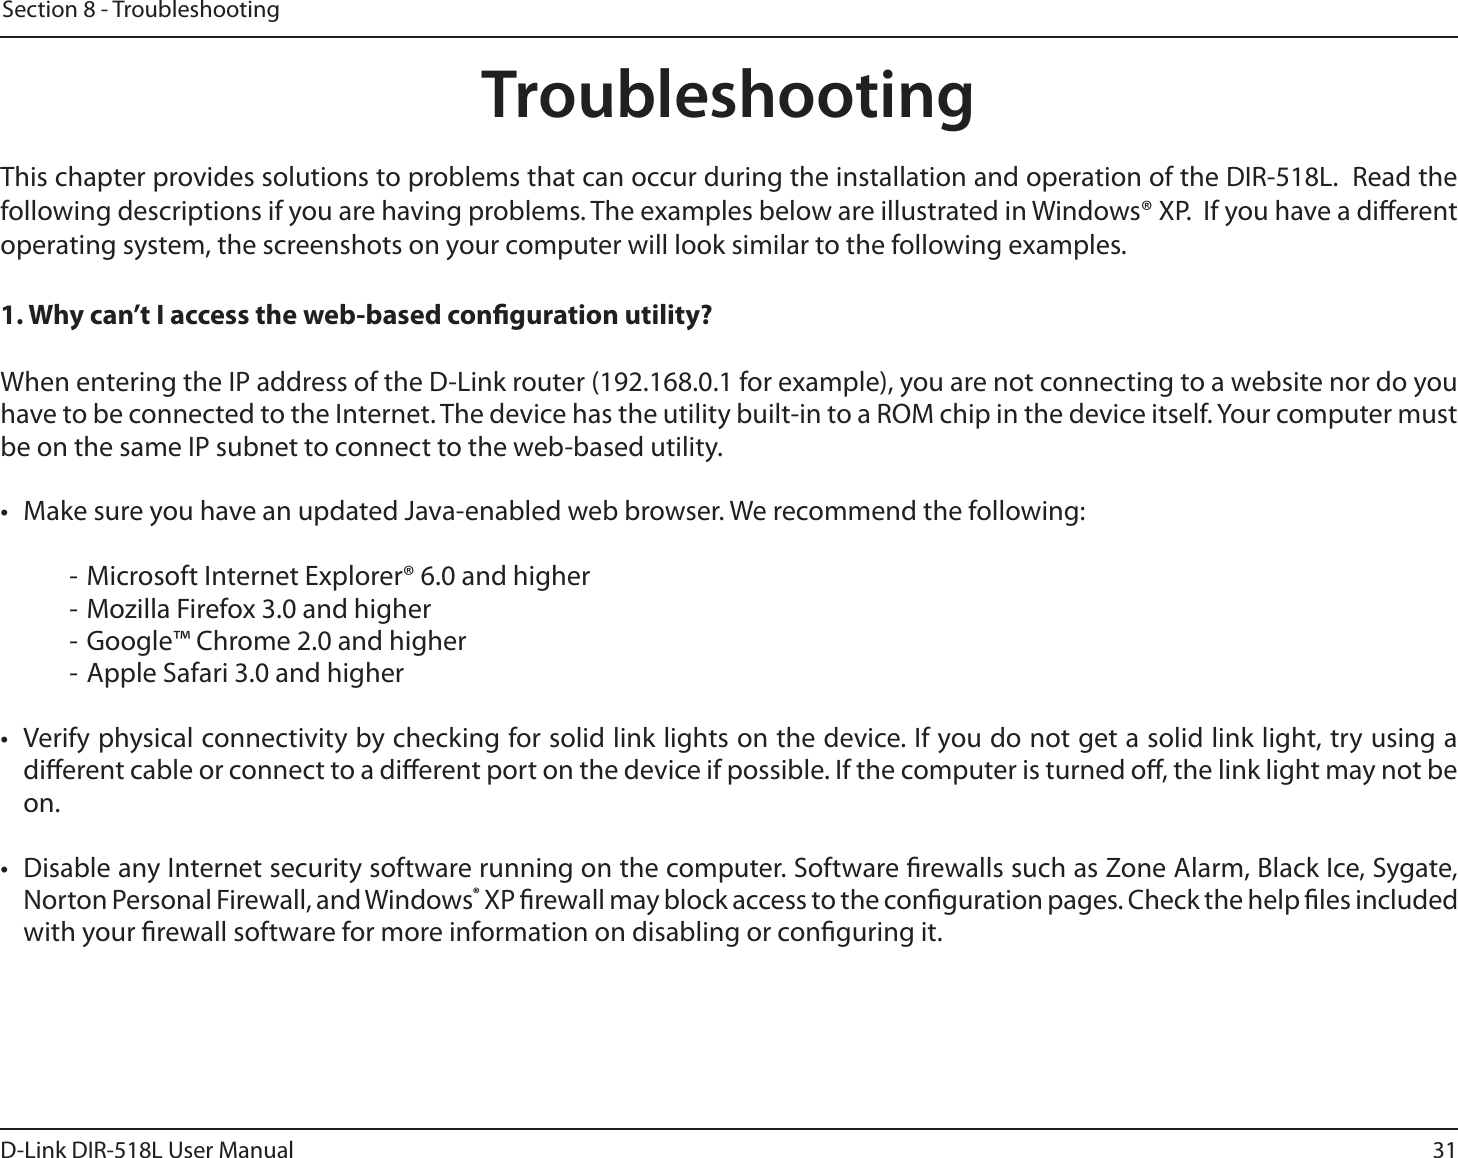 31D-Link DIR-518L User ManualSection 8 - TroubleshootingTroubleshootingThis chapter provides solutions to problems that can occur during the installation and operation of the DIR-518L.  Read the following descriptions if you are having problems. The examples below are illustrated in Windows® XP.  If you have a dierent operating system, the screenshots on your computer will look similar to the following examples.1. Why can’t I access the web-based conguration utility?When entering the IP address of the D-Link router (192.168.0.1 for example), you are not connecting to a website nor do you have to be connected to the Internet. The device has the utility built-in to a ROM chip in the device itself. Your computer must be on the same IP subnet to connect to the web-based utility. • Make sure you have an updated Java-enabled web browser. We recommend the following: - Microsoft Internet Explorer® 6.0 and higher- Mozilla Firefox 3.0 and higher- Google™ Chrome 2.0 and higher- Apple Safari 3.0 and higher• Verify physical connectivity by checking for solid link lights on the device. If you do not get a solid link light, try using a dierent cable or connect to a dierent port on the device if possible. If the computer is turned o, the link light may not be on.• Disable any Internet security software running on the computer. Software rewalls such as Zone Alarm, Black Ice, Sygate, Norton Personal Firewall, and Windows® XP rewall may block access to the conguration pages. Check the help les included with your rewall software for more information on disabling or conguring it.